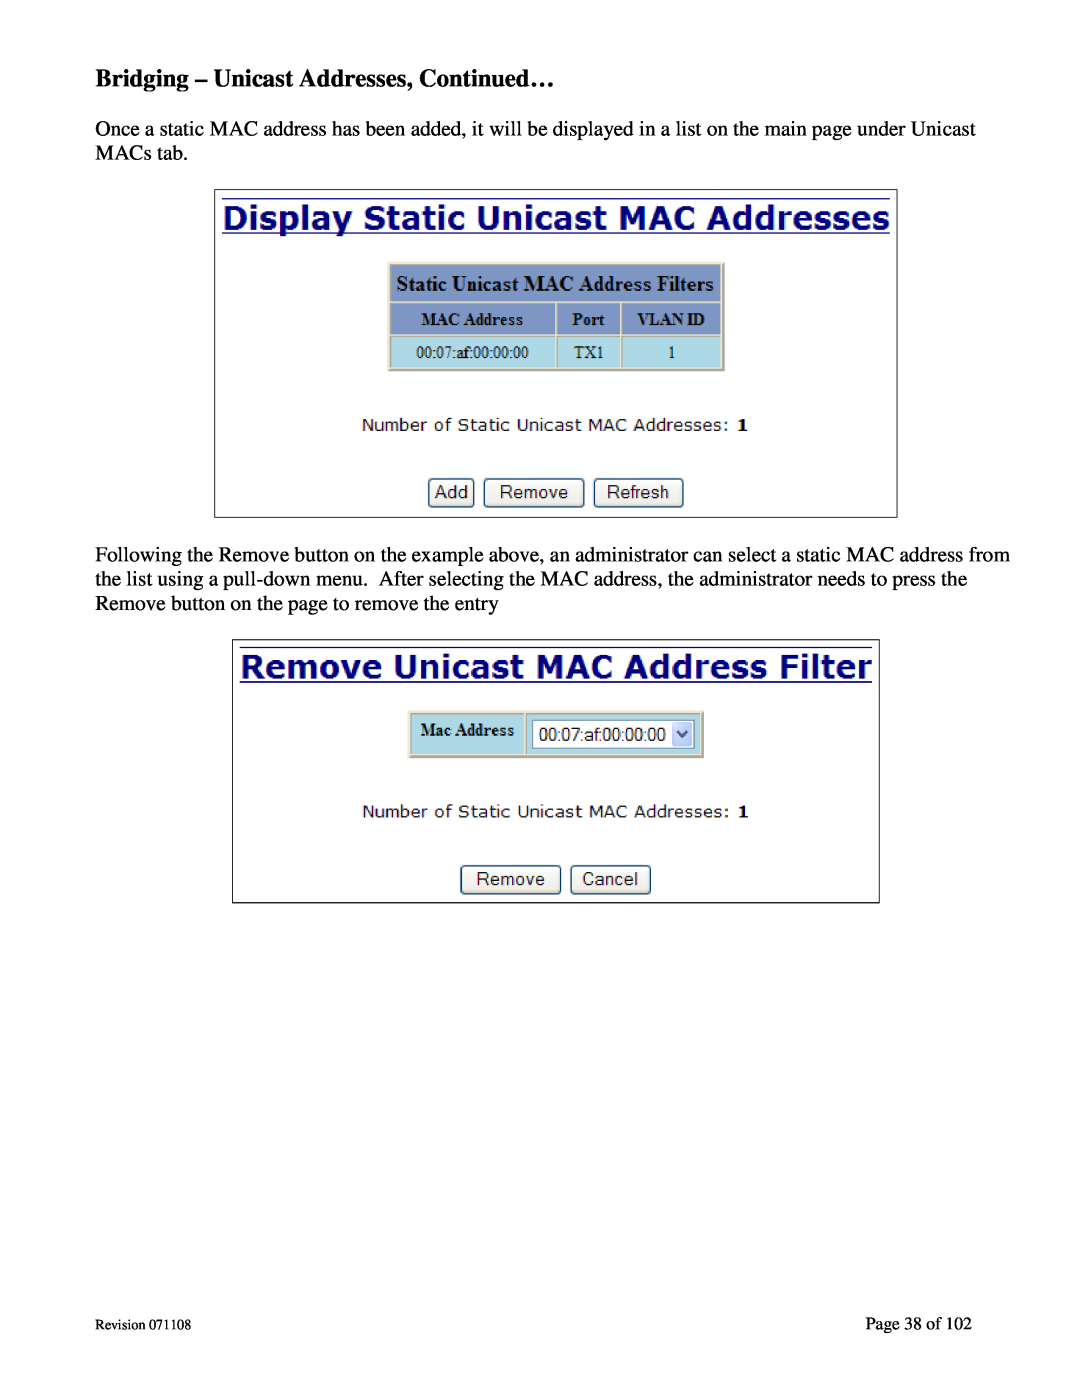 N-Tron 708M12 user manual Bridging - Unicast Addresses, Continued…, Page 38 of 